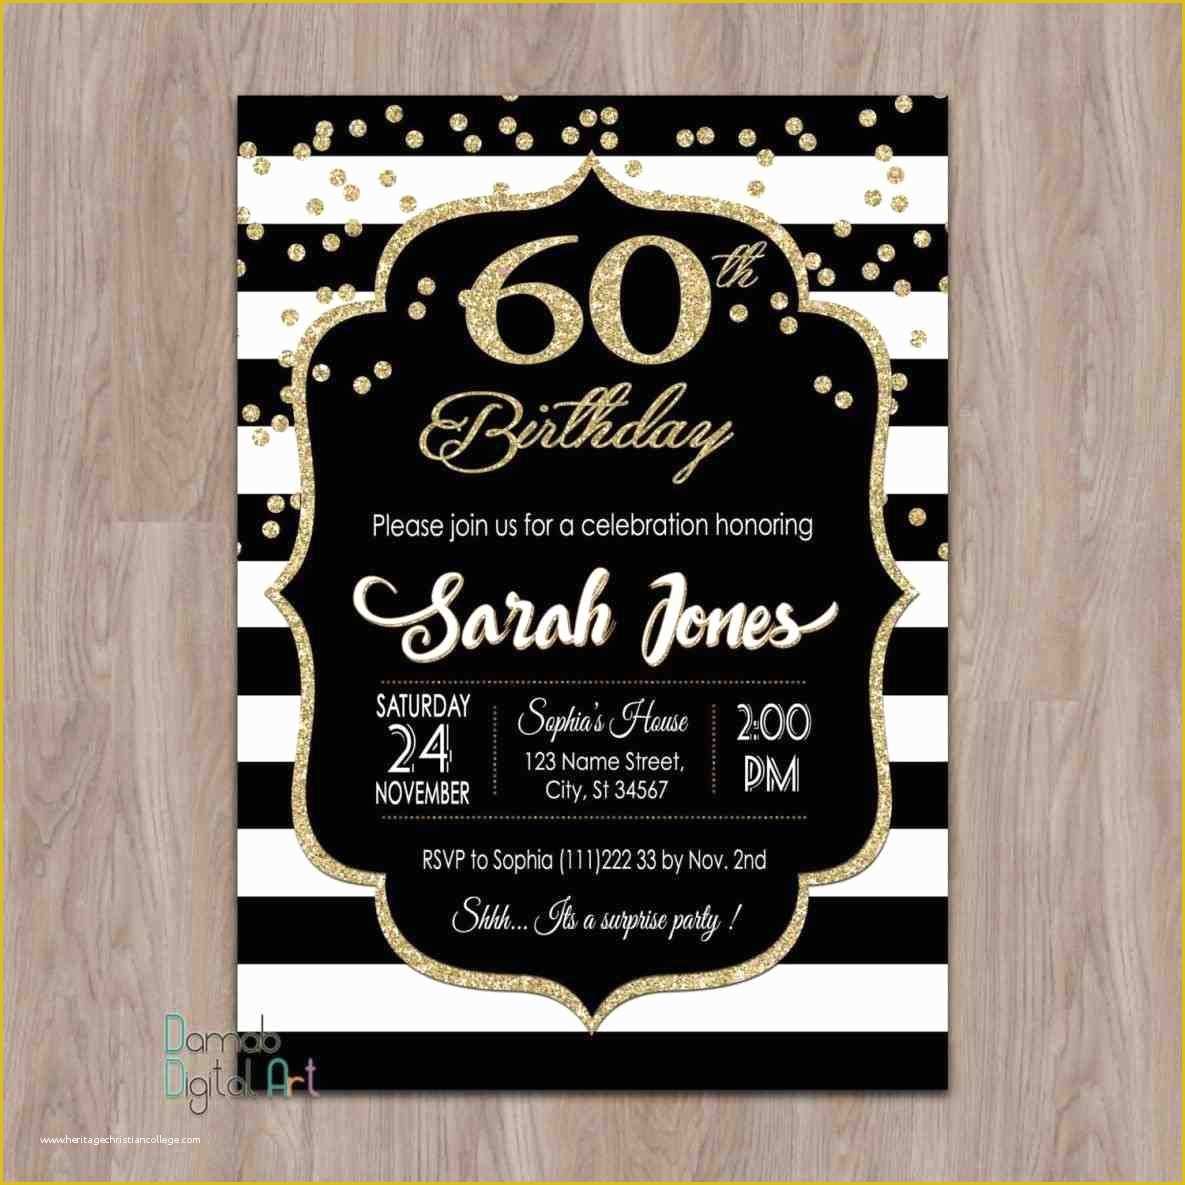 60th Birthday Party Invitation Templates Free Download Of Full Size Of Design 30th Birthday Invitation Template